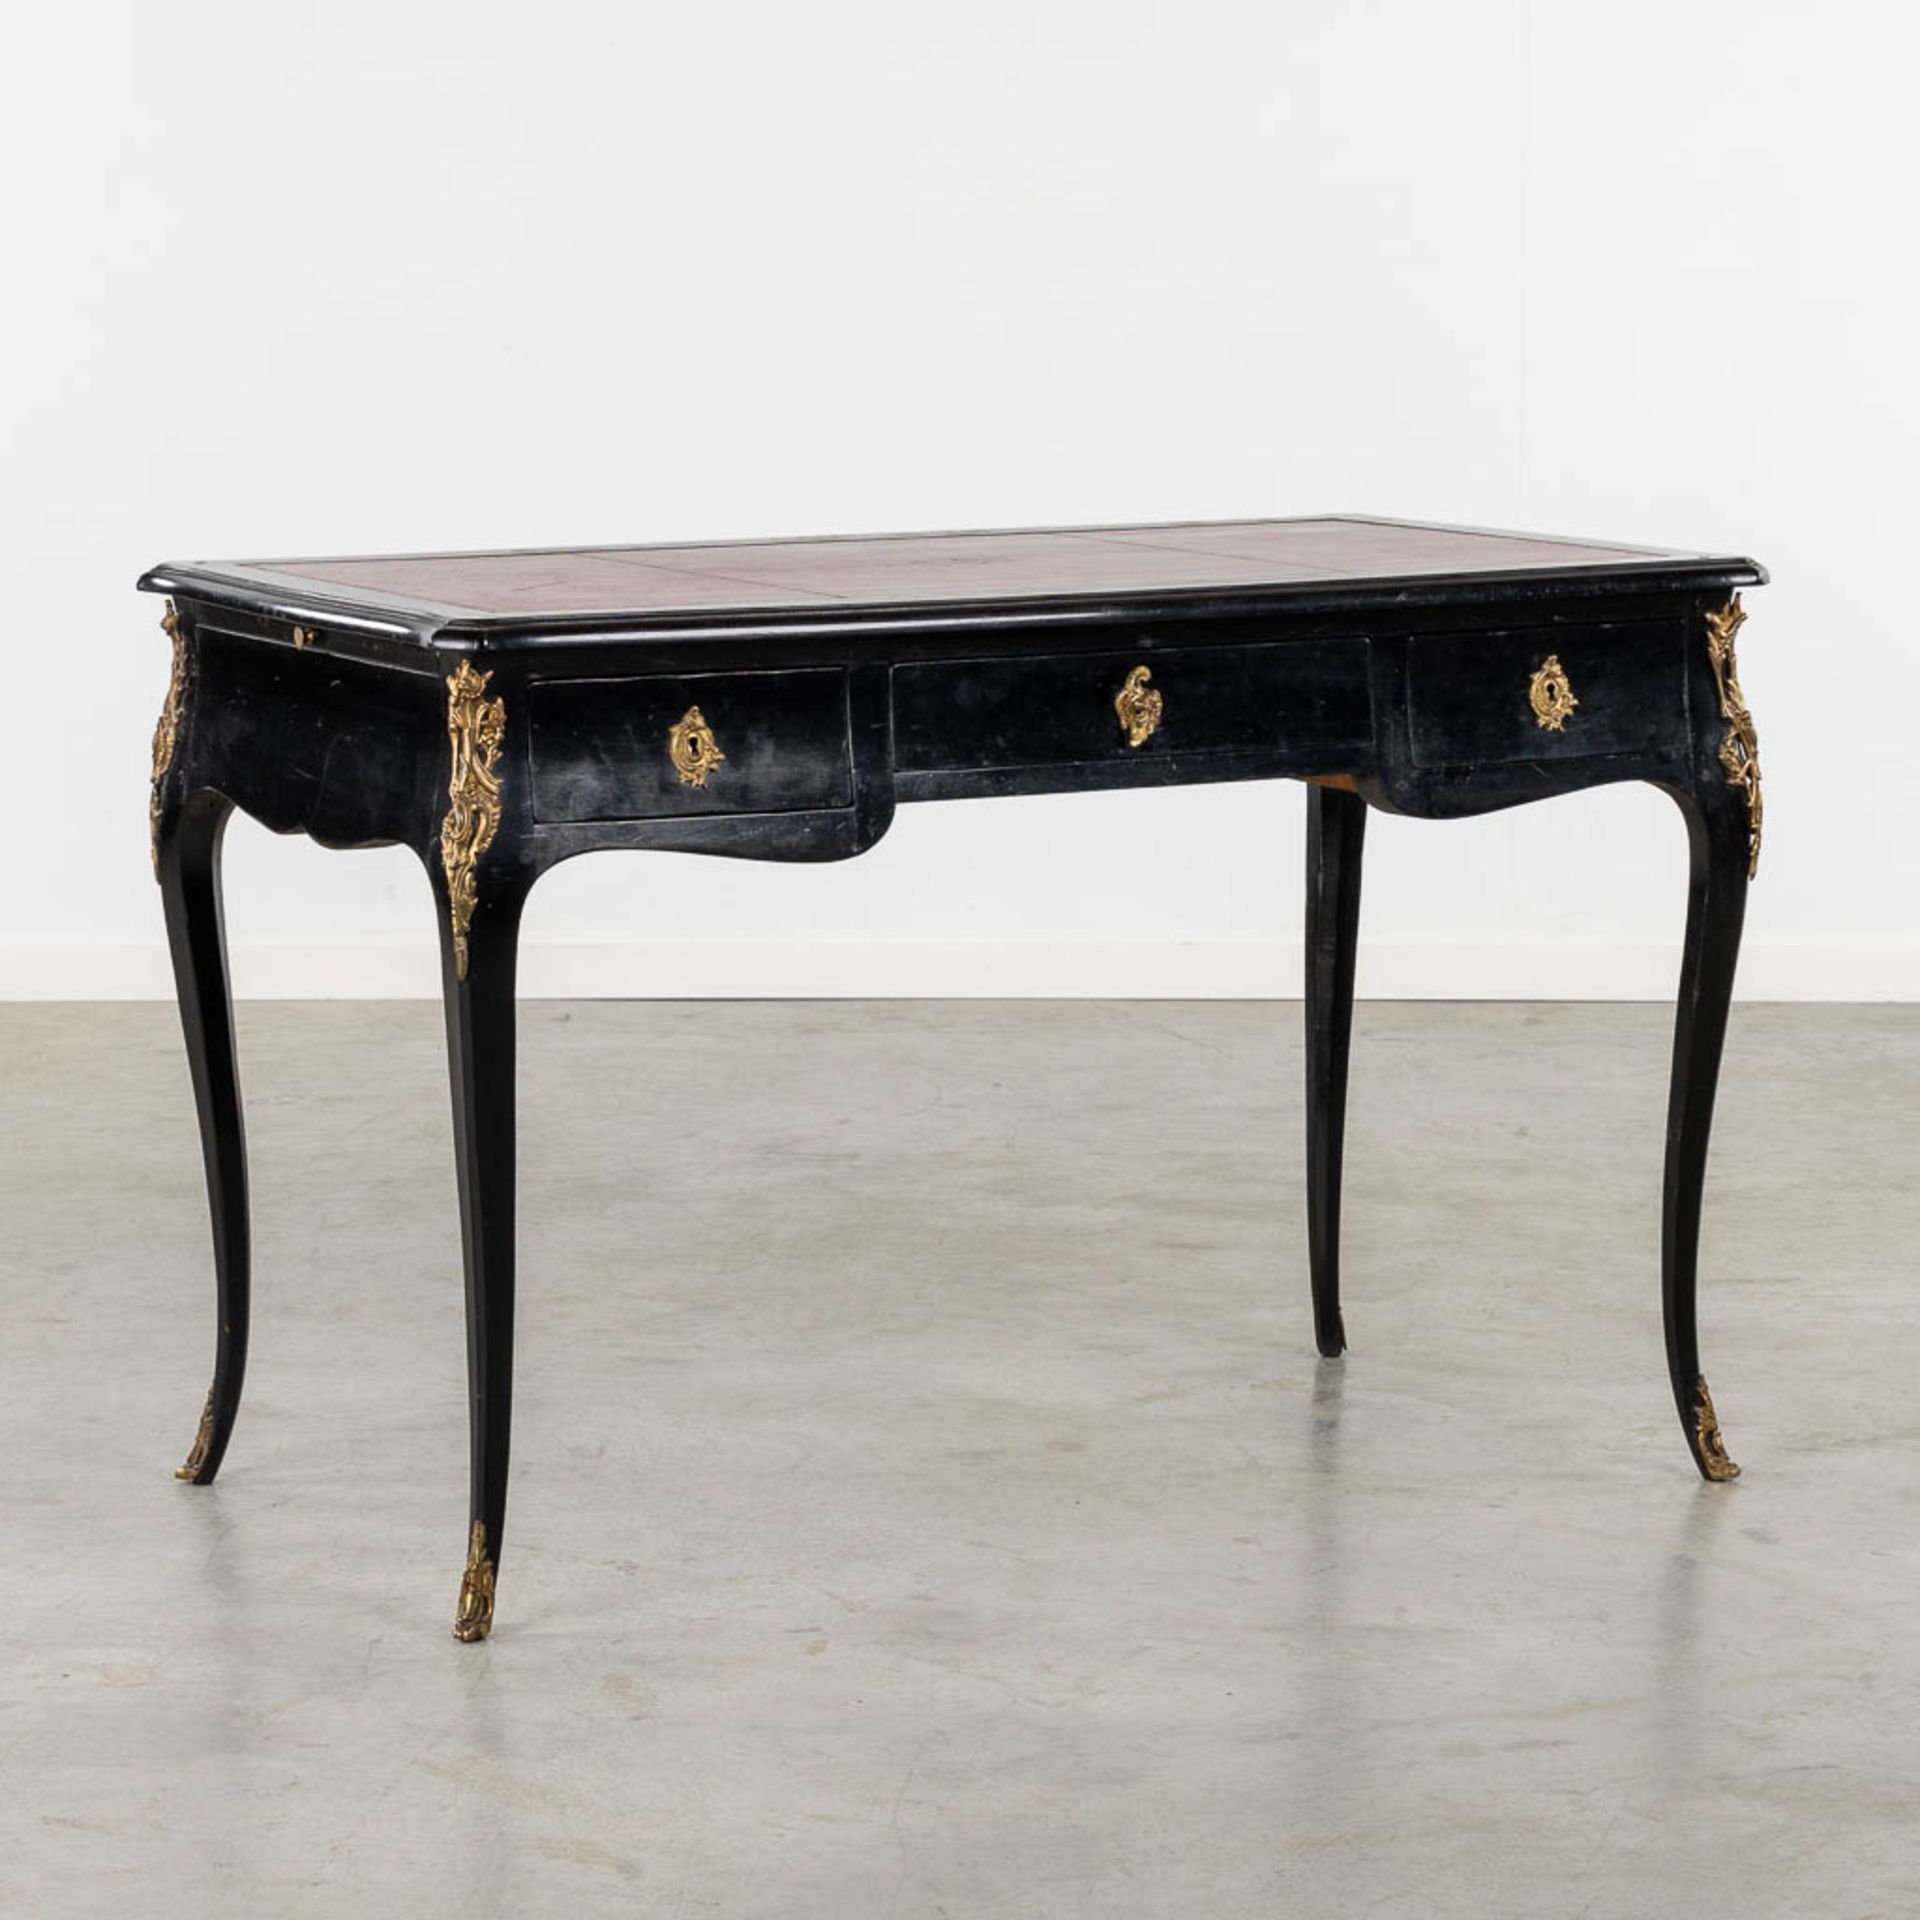 A fine ebonised wood Ladies desk, mounted with gilt bronze in Louis XV style. (L:64 x W:116 x H:76 c